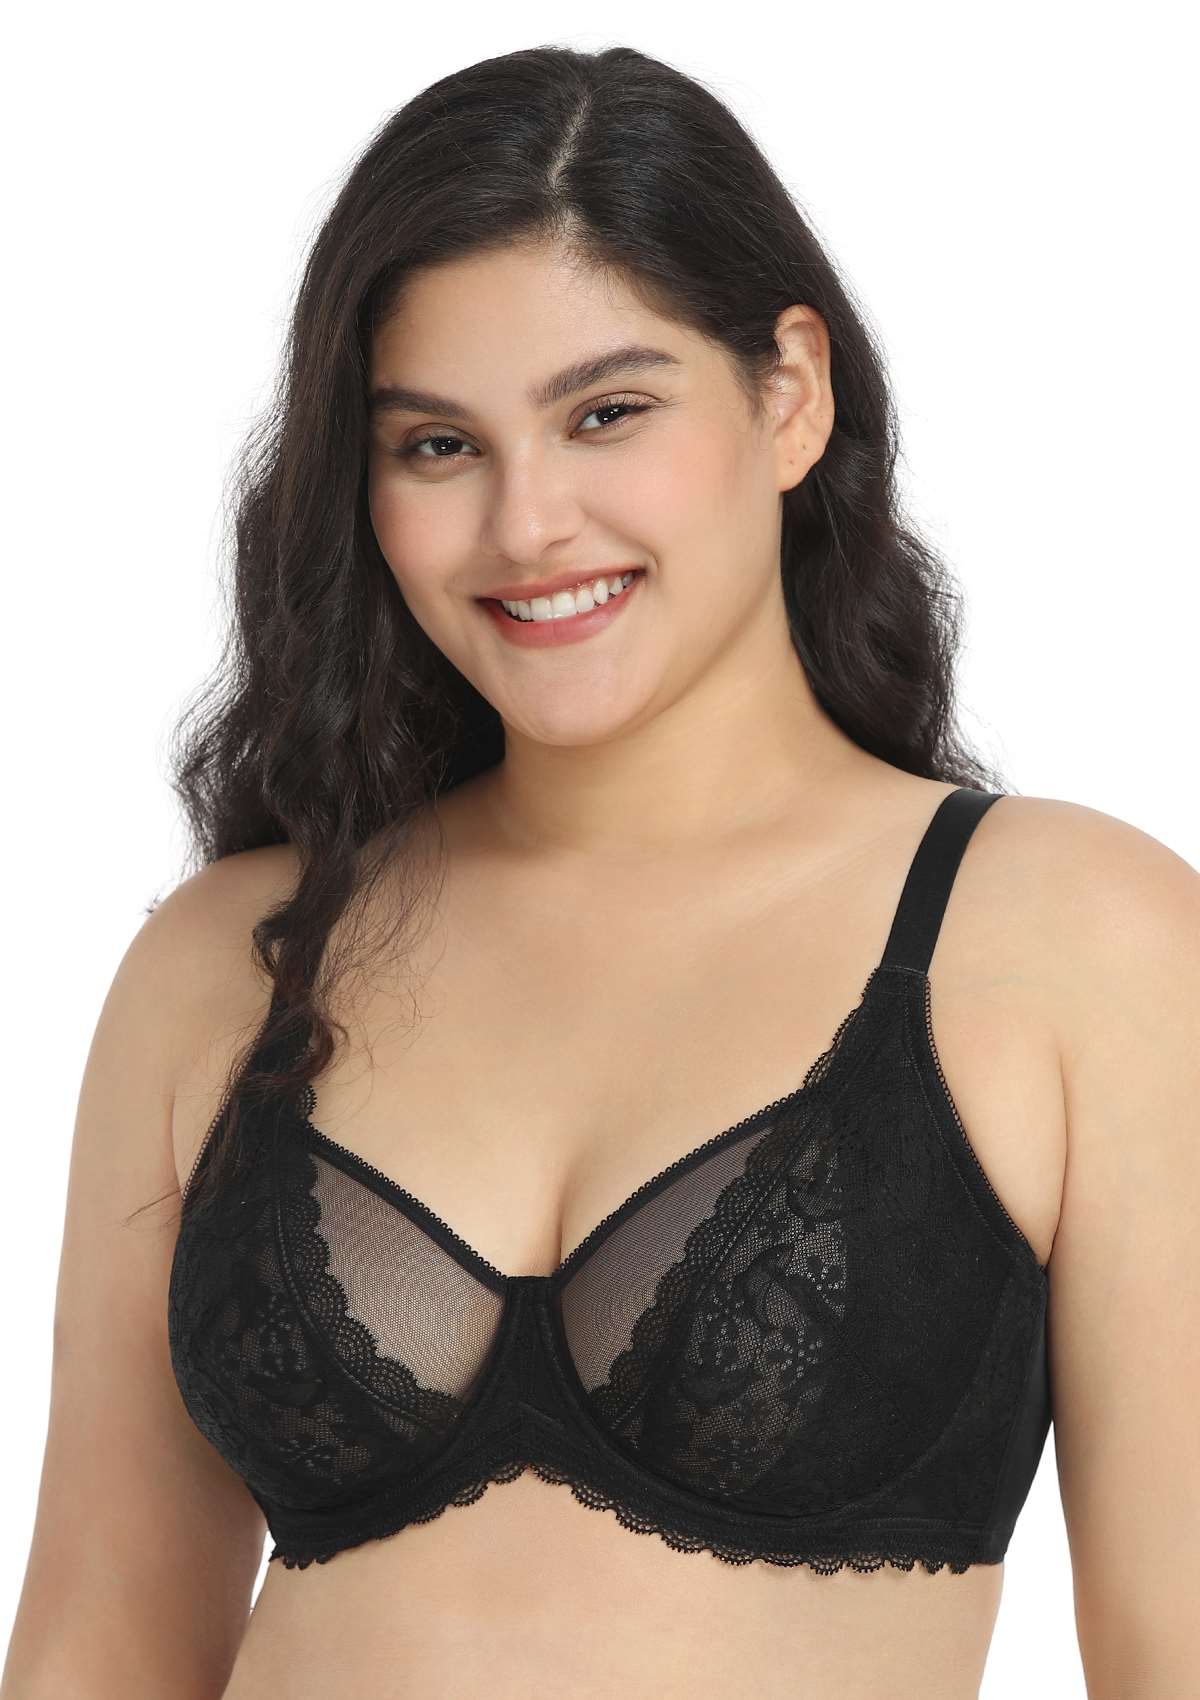 HSIA Anemone Big Bra: Best Bra For Lift And Support, Floral Bra - Black / 40 / DD/E